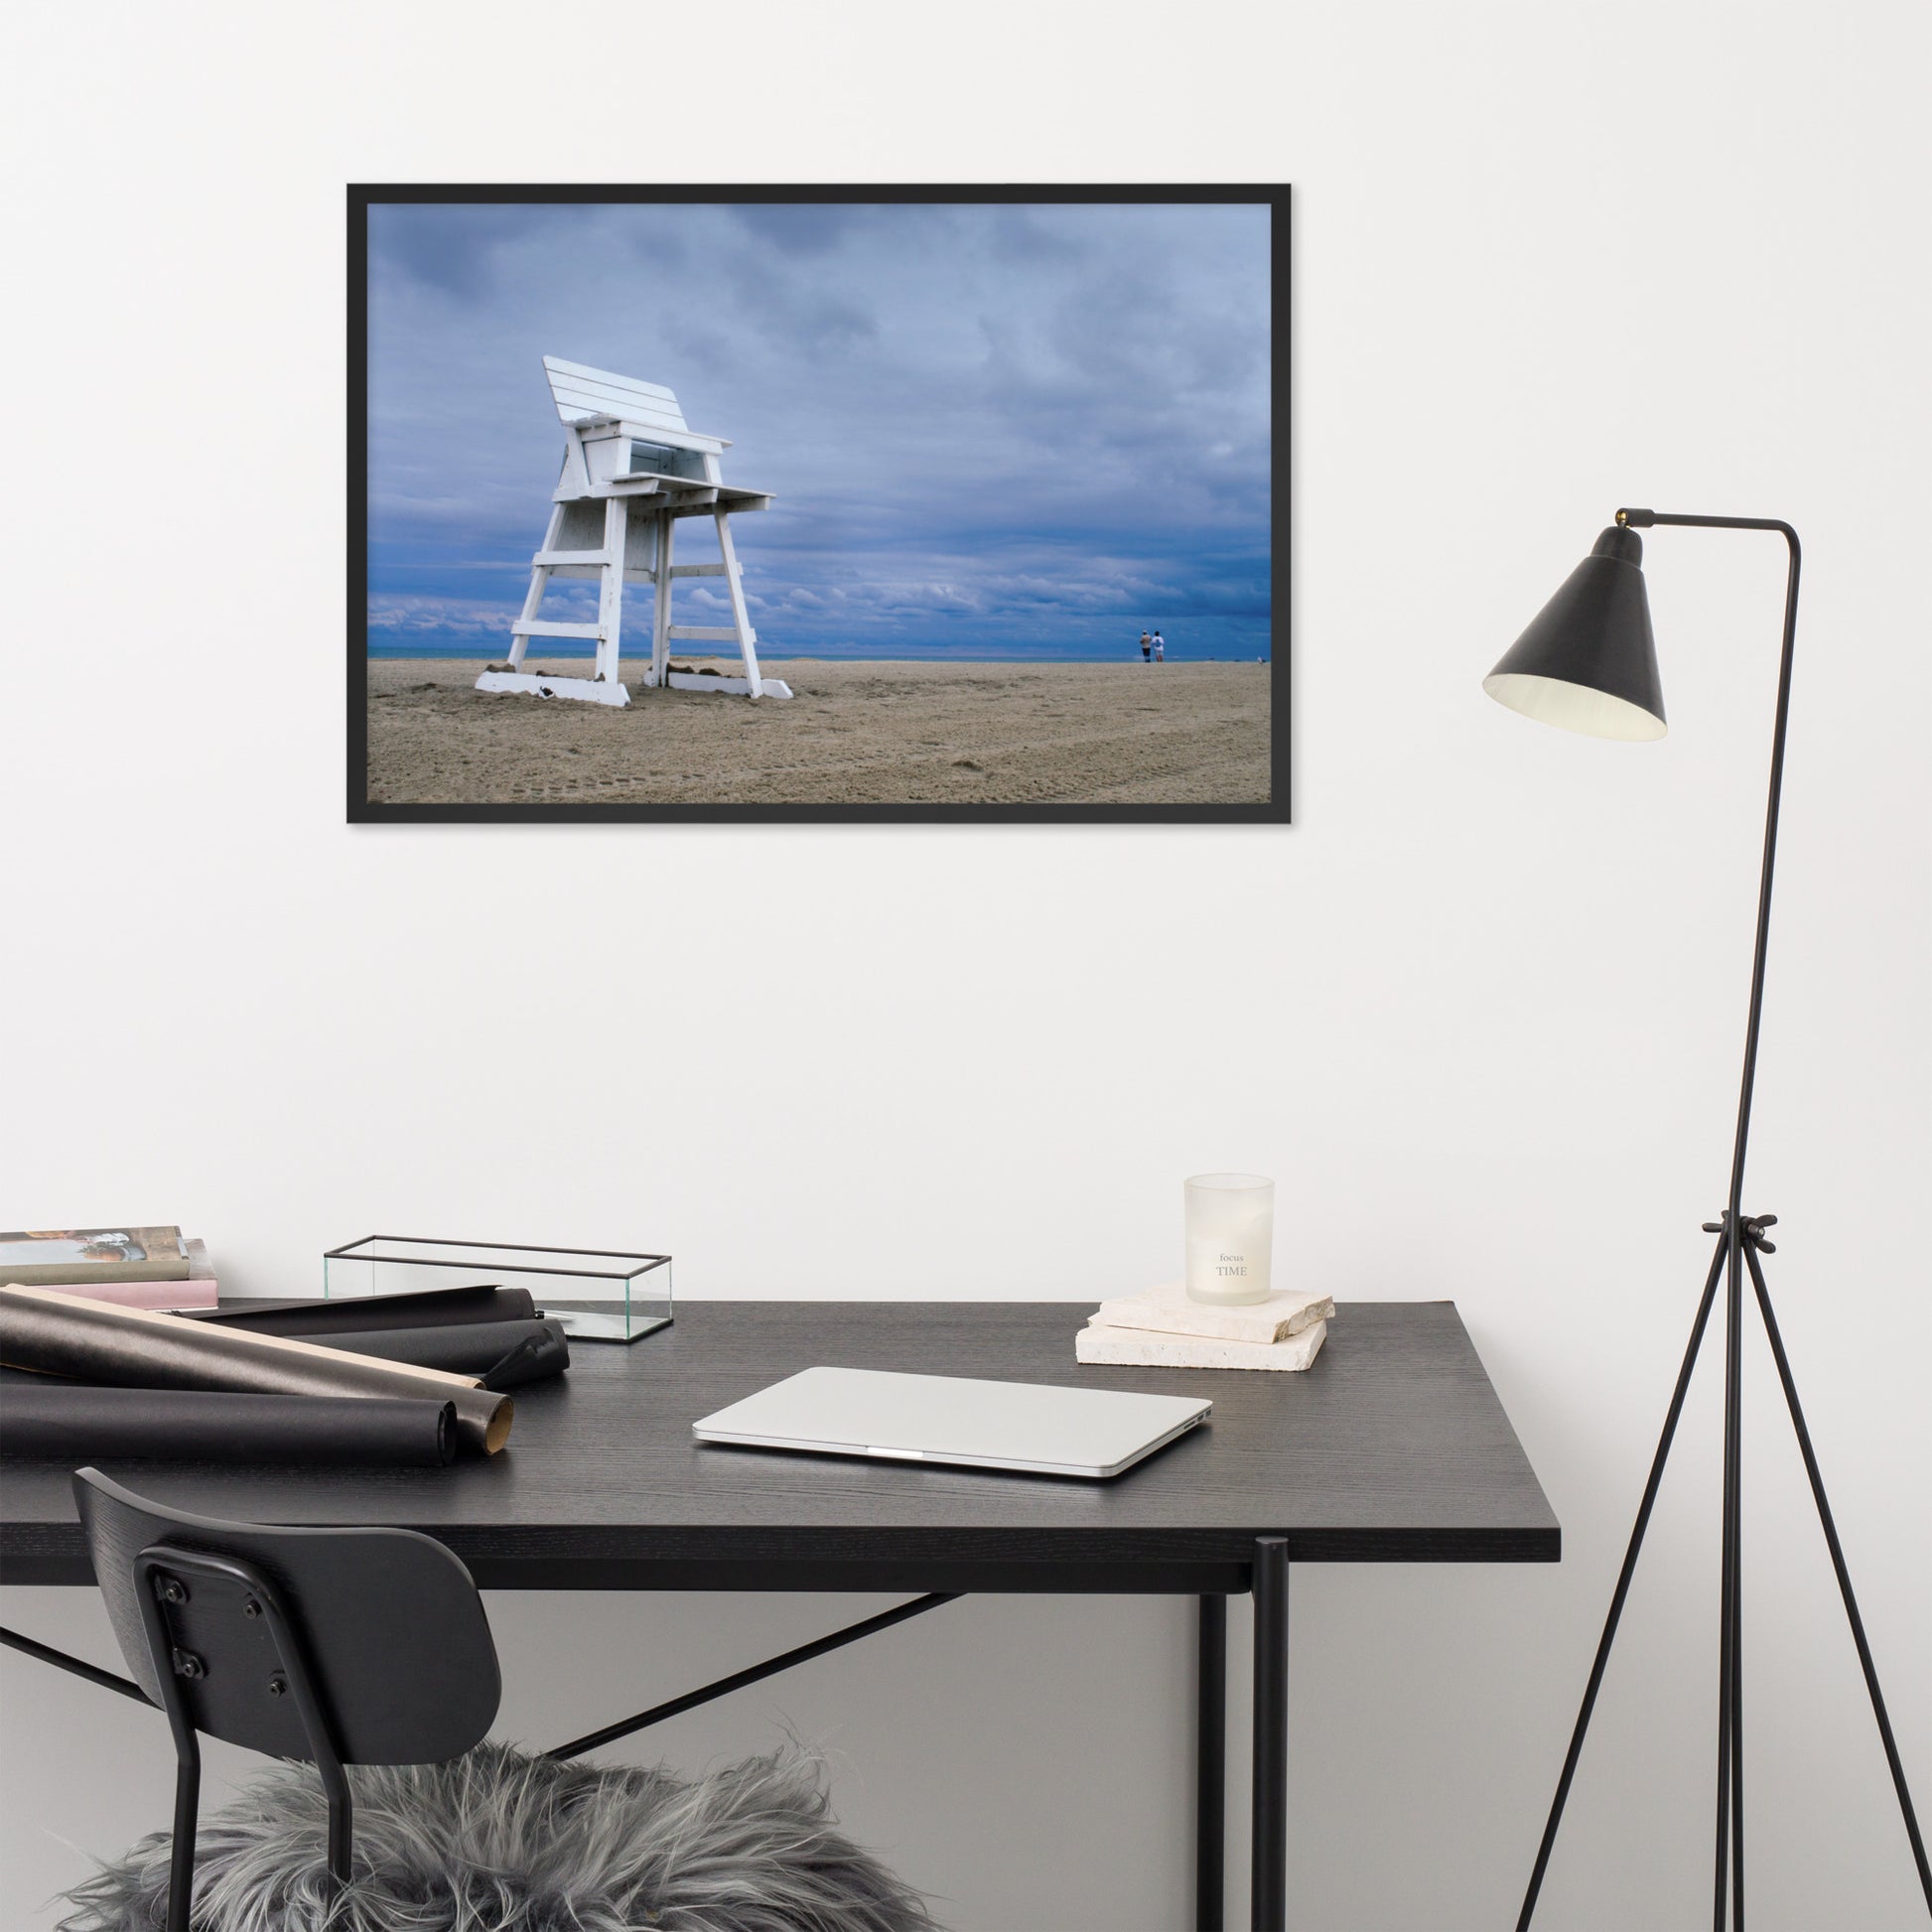 Large Pictures For Office Walls: Approaching Storm - Coastal / Beach / Seascape / Nature / Landscape Photo Framed Wall Art Print - Artwork